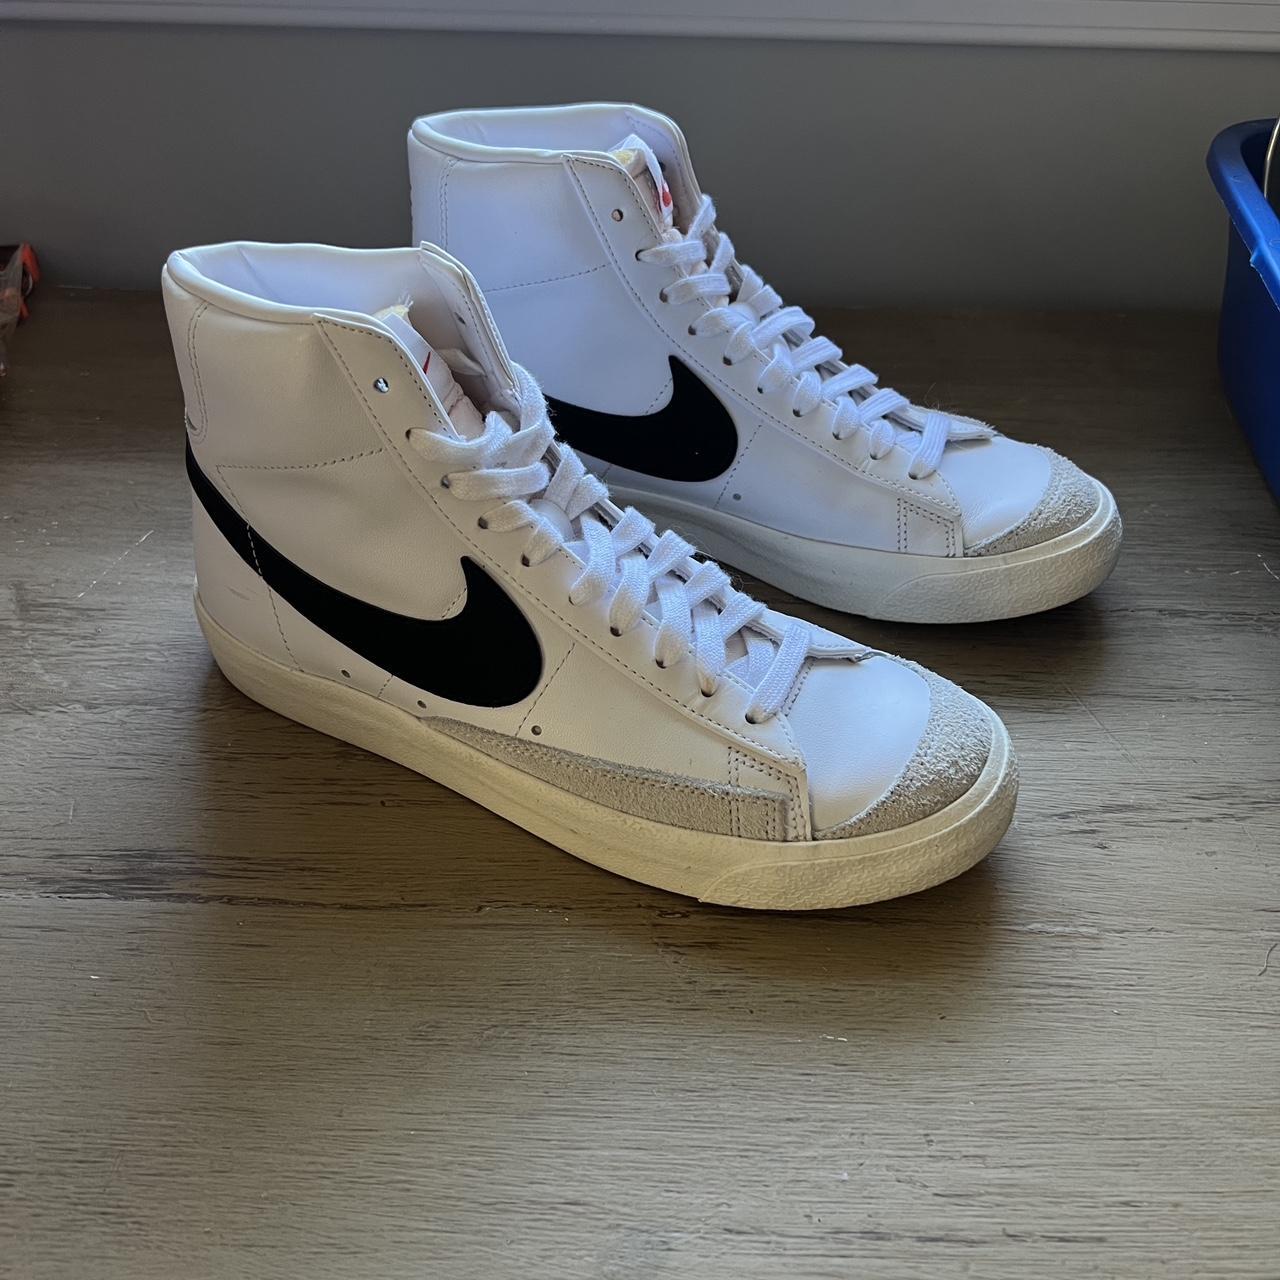 Nike Blazers Mid ‘77 Amazing condition! Only wore a... - Depop